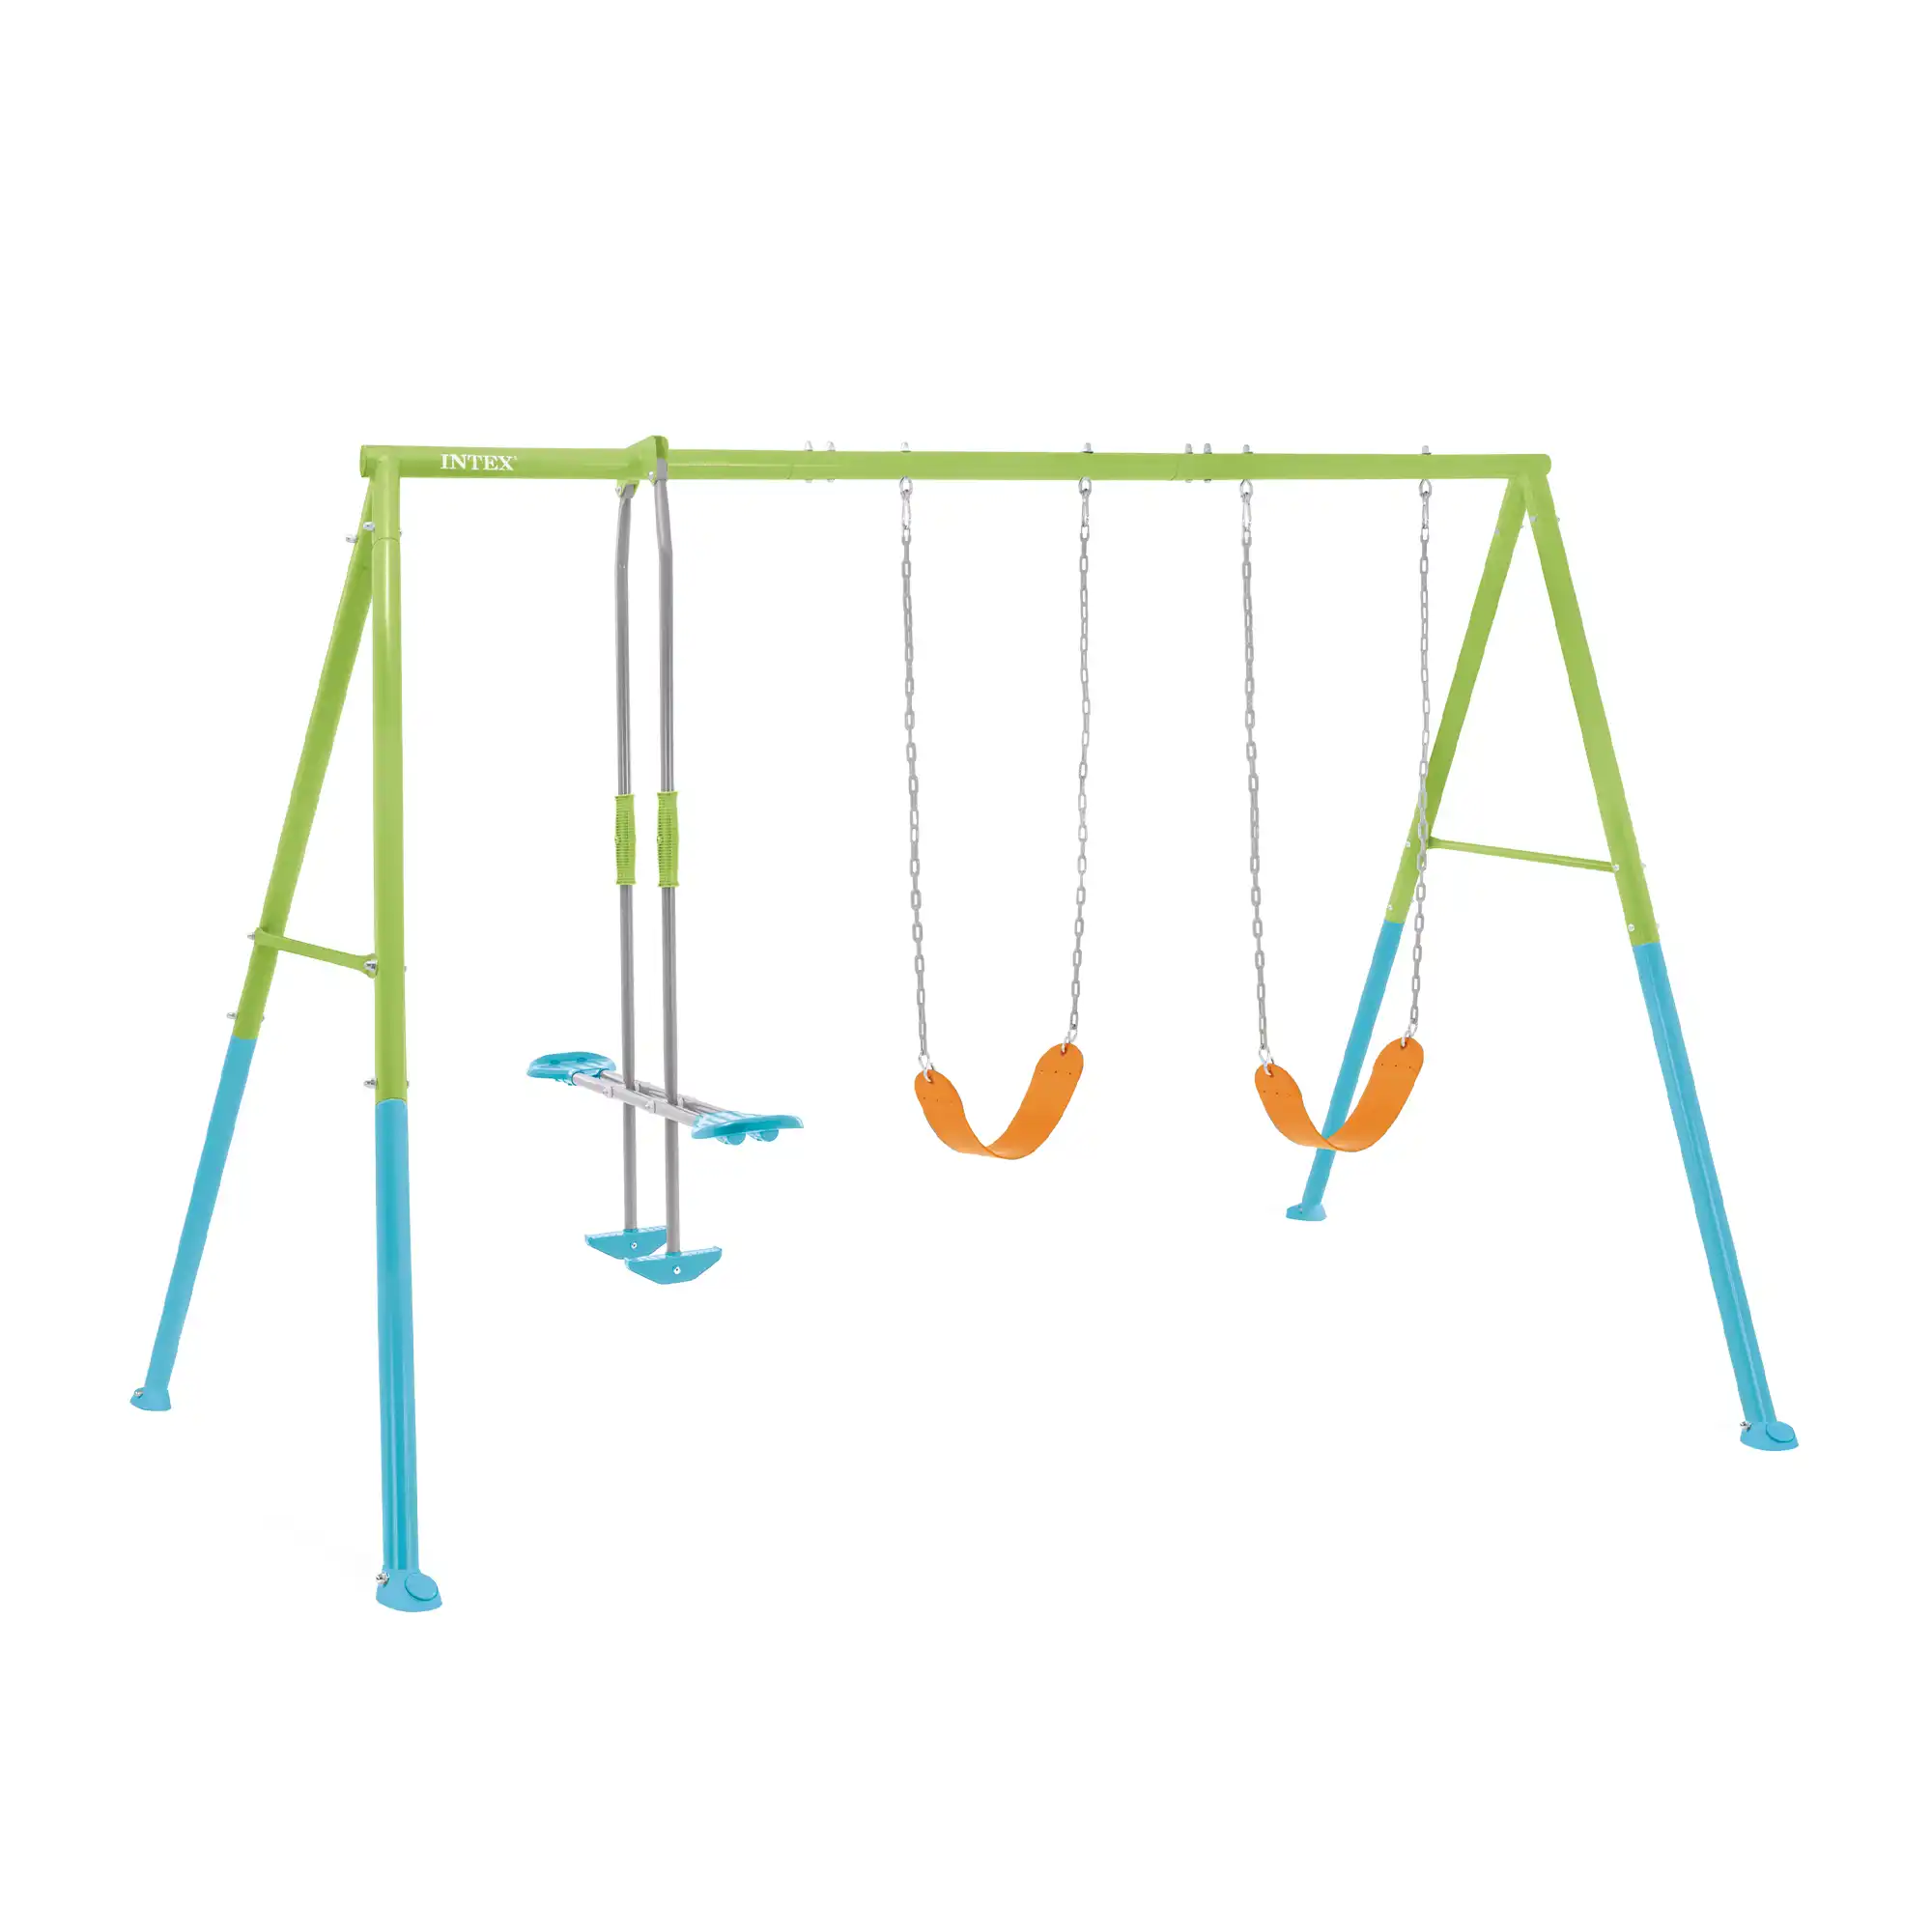 Colorful Swing & Glide Three Feature Set